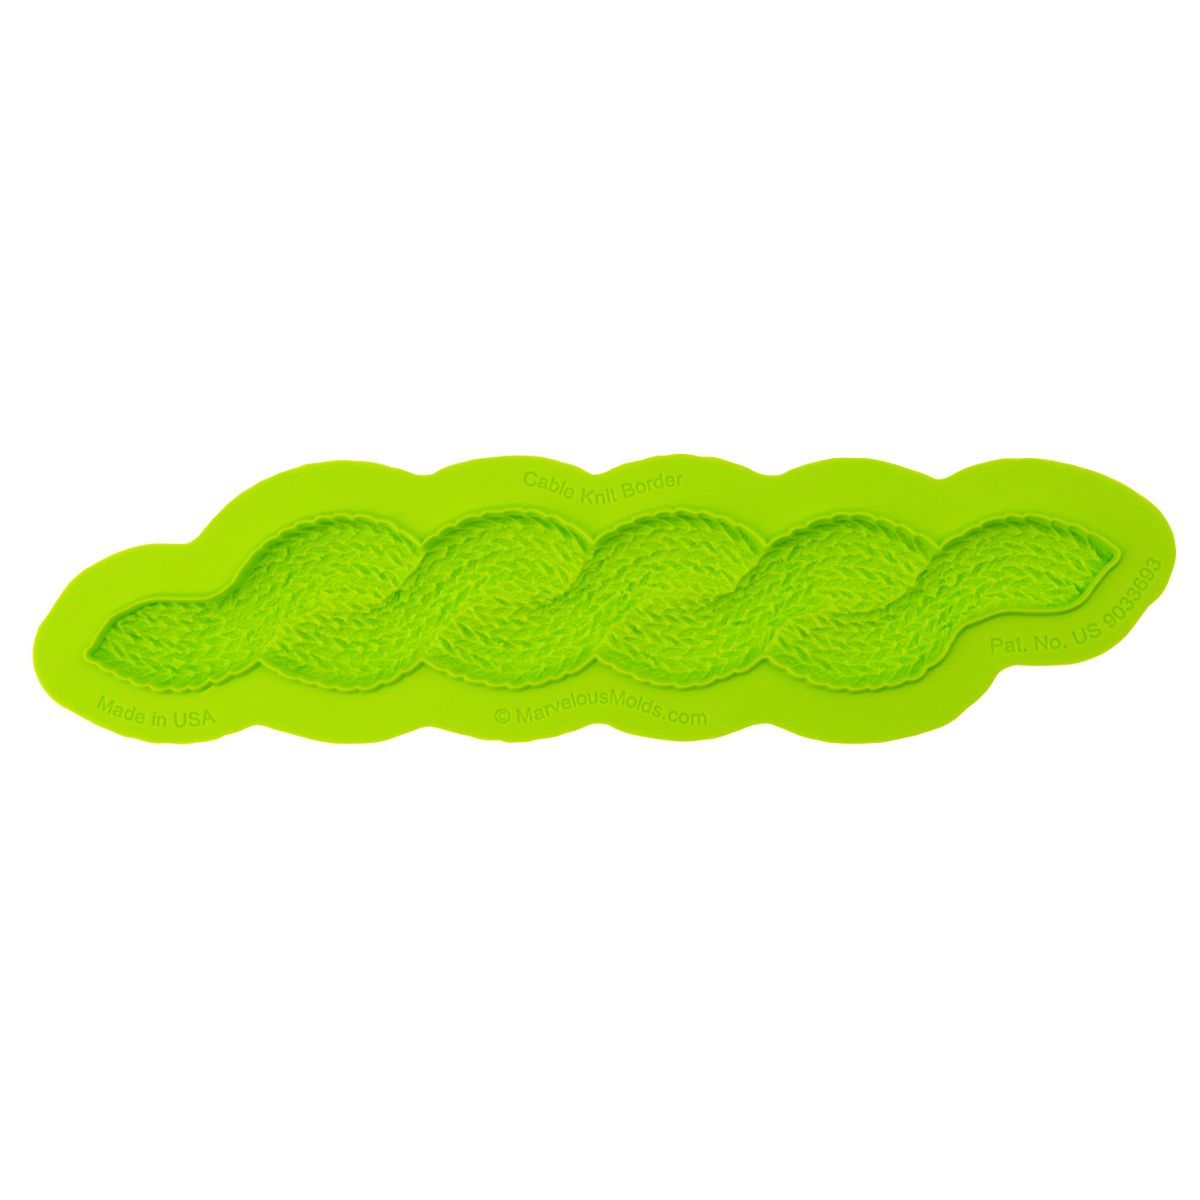 Cable Knit Border Mold Marvelous Molds Silicone Mold - Bake Supply Plus